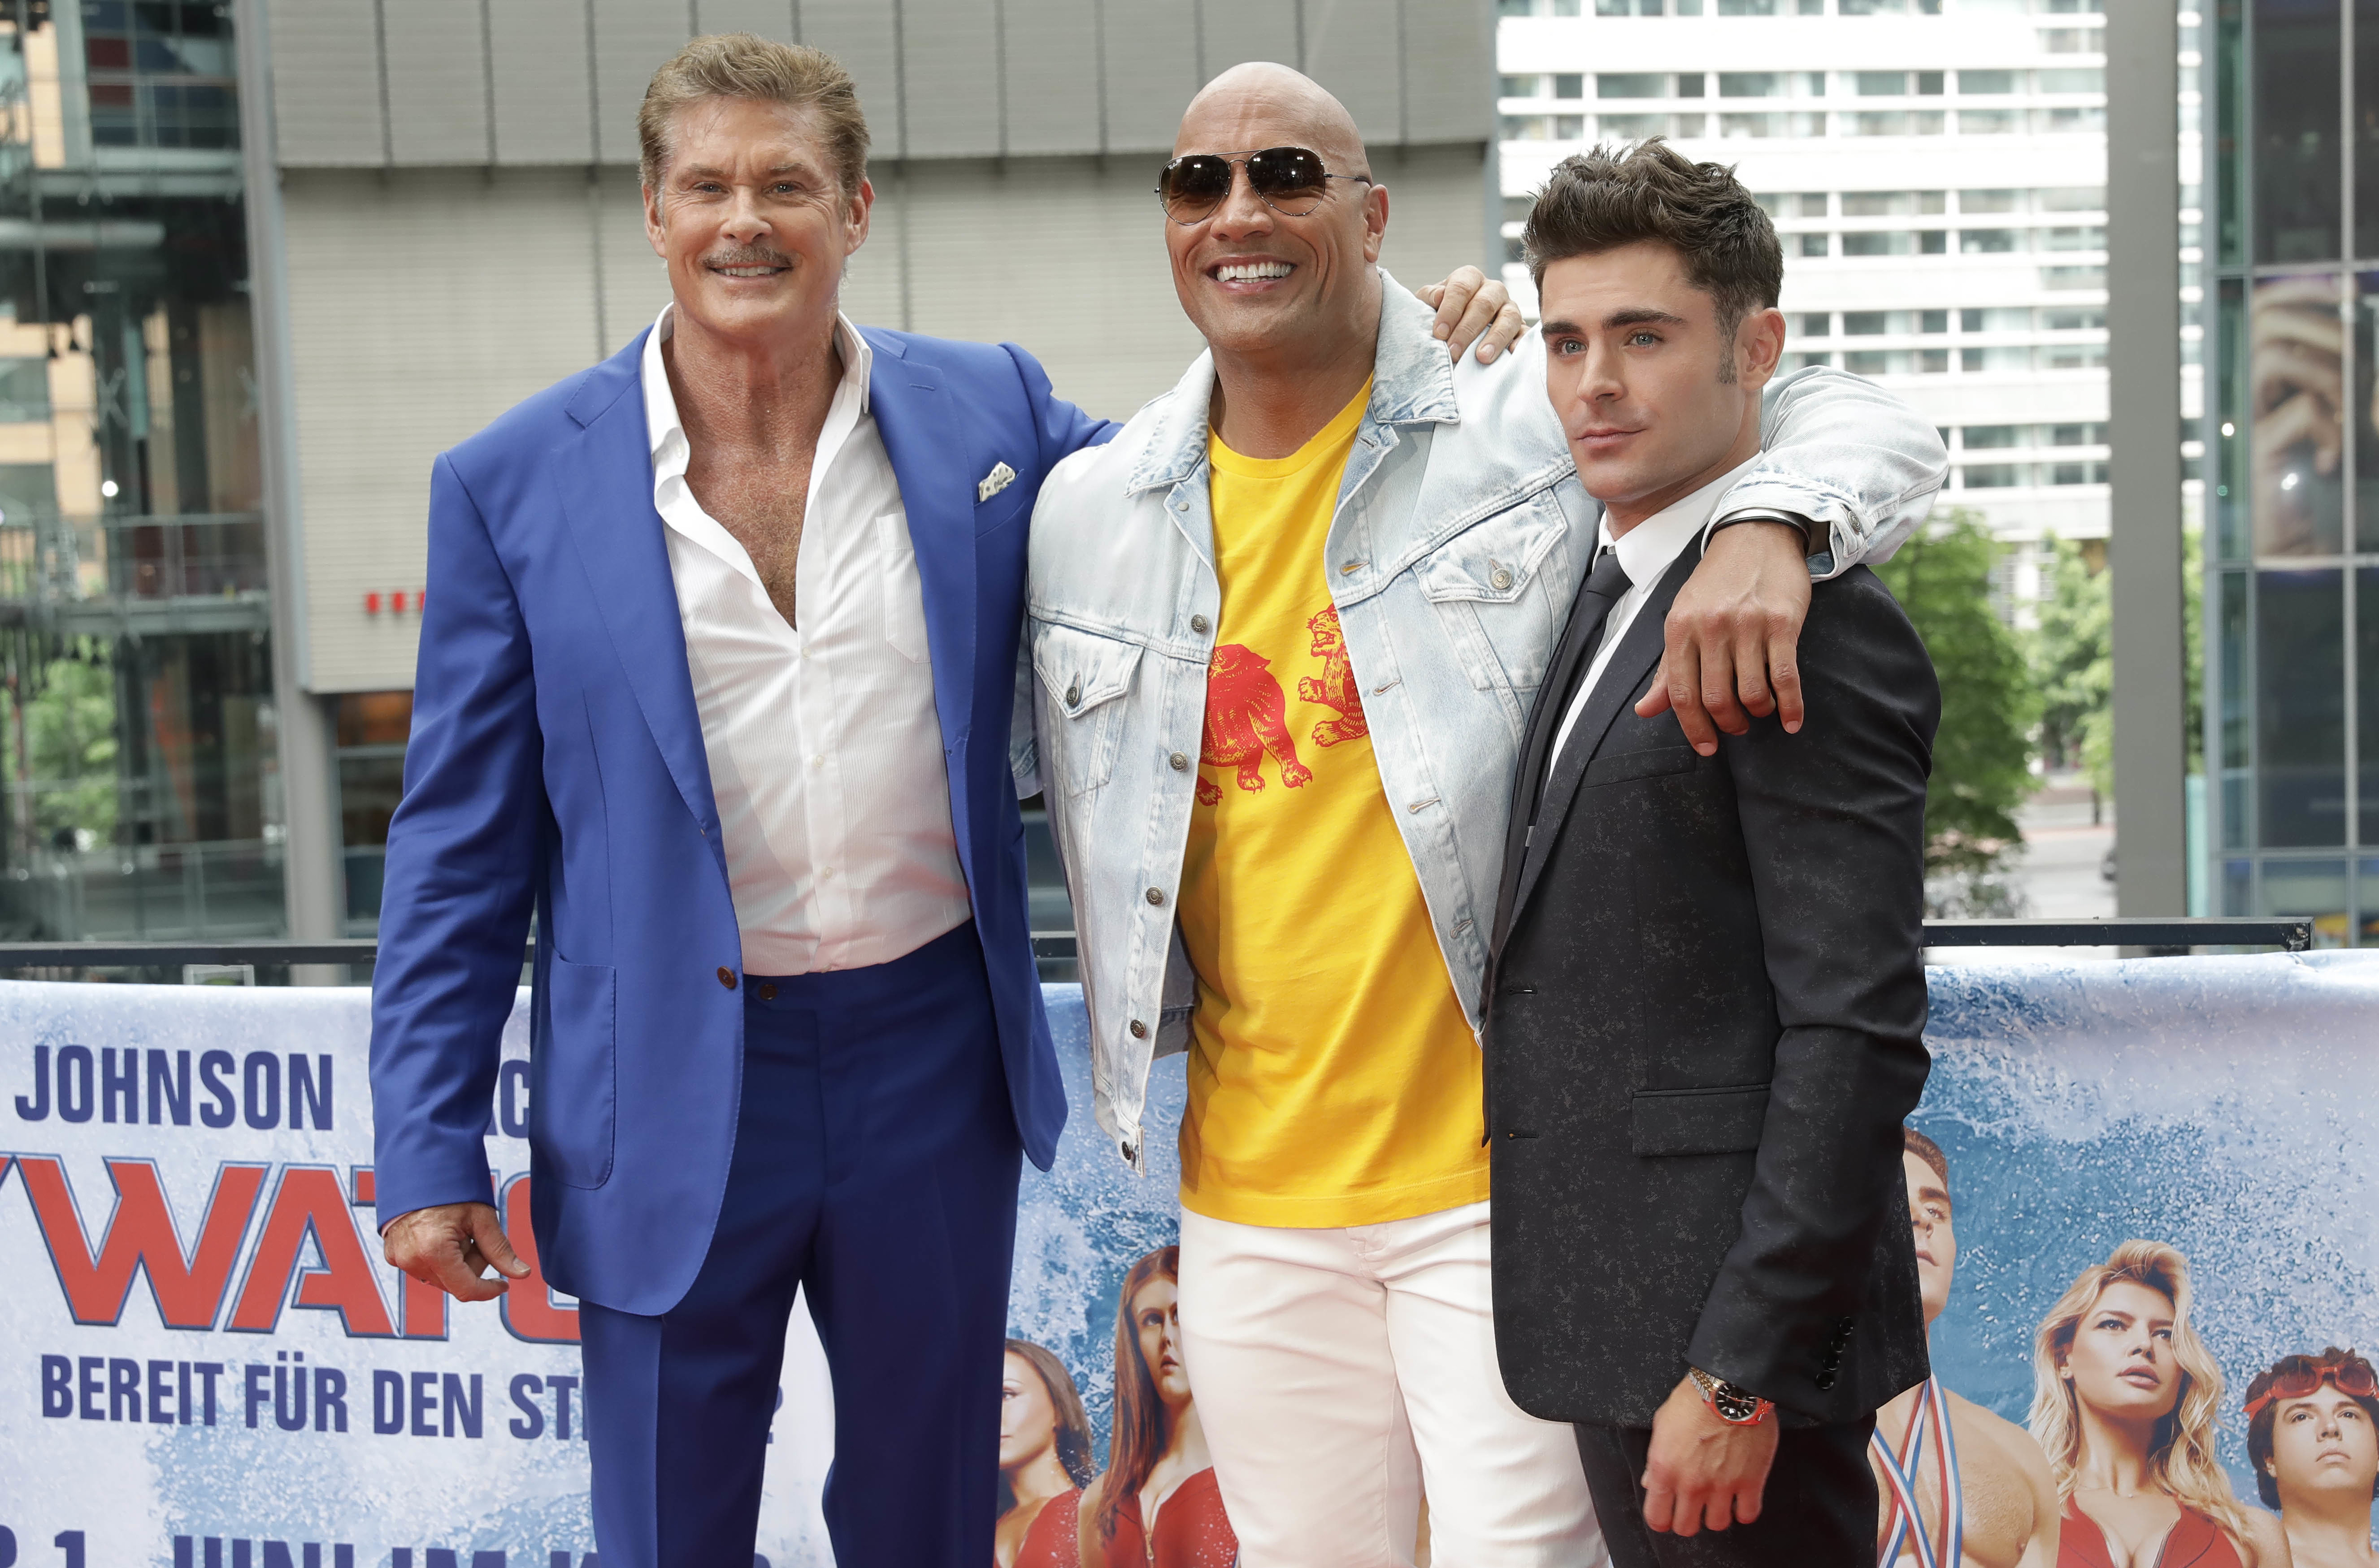 Close-up of Zac smiling and standing with Dwayne Johnson and David Hasselhoff at a media event